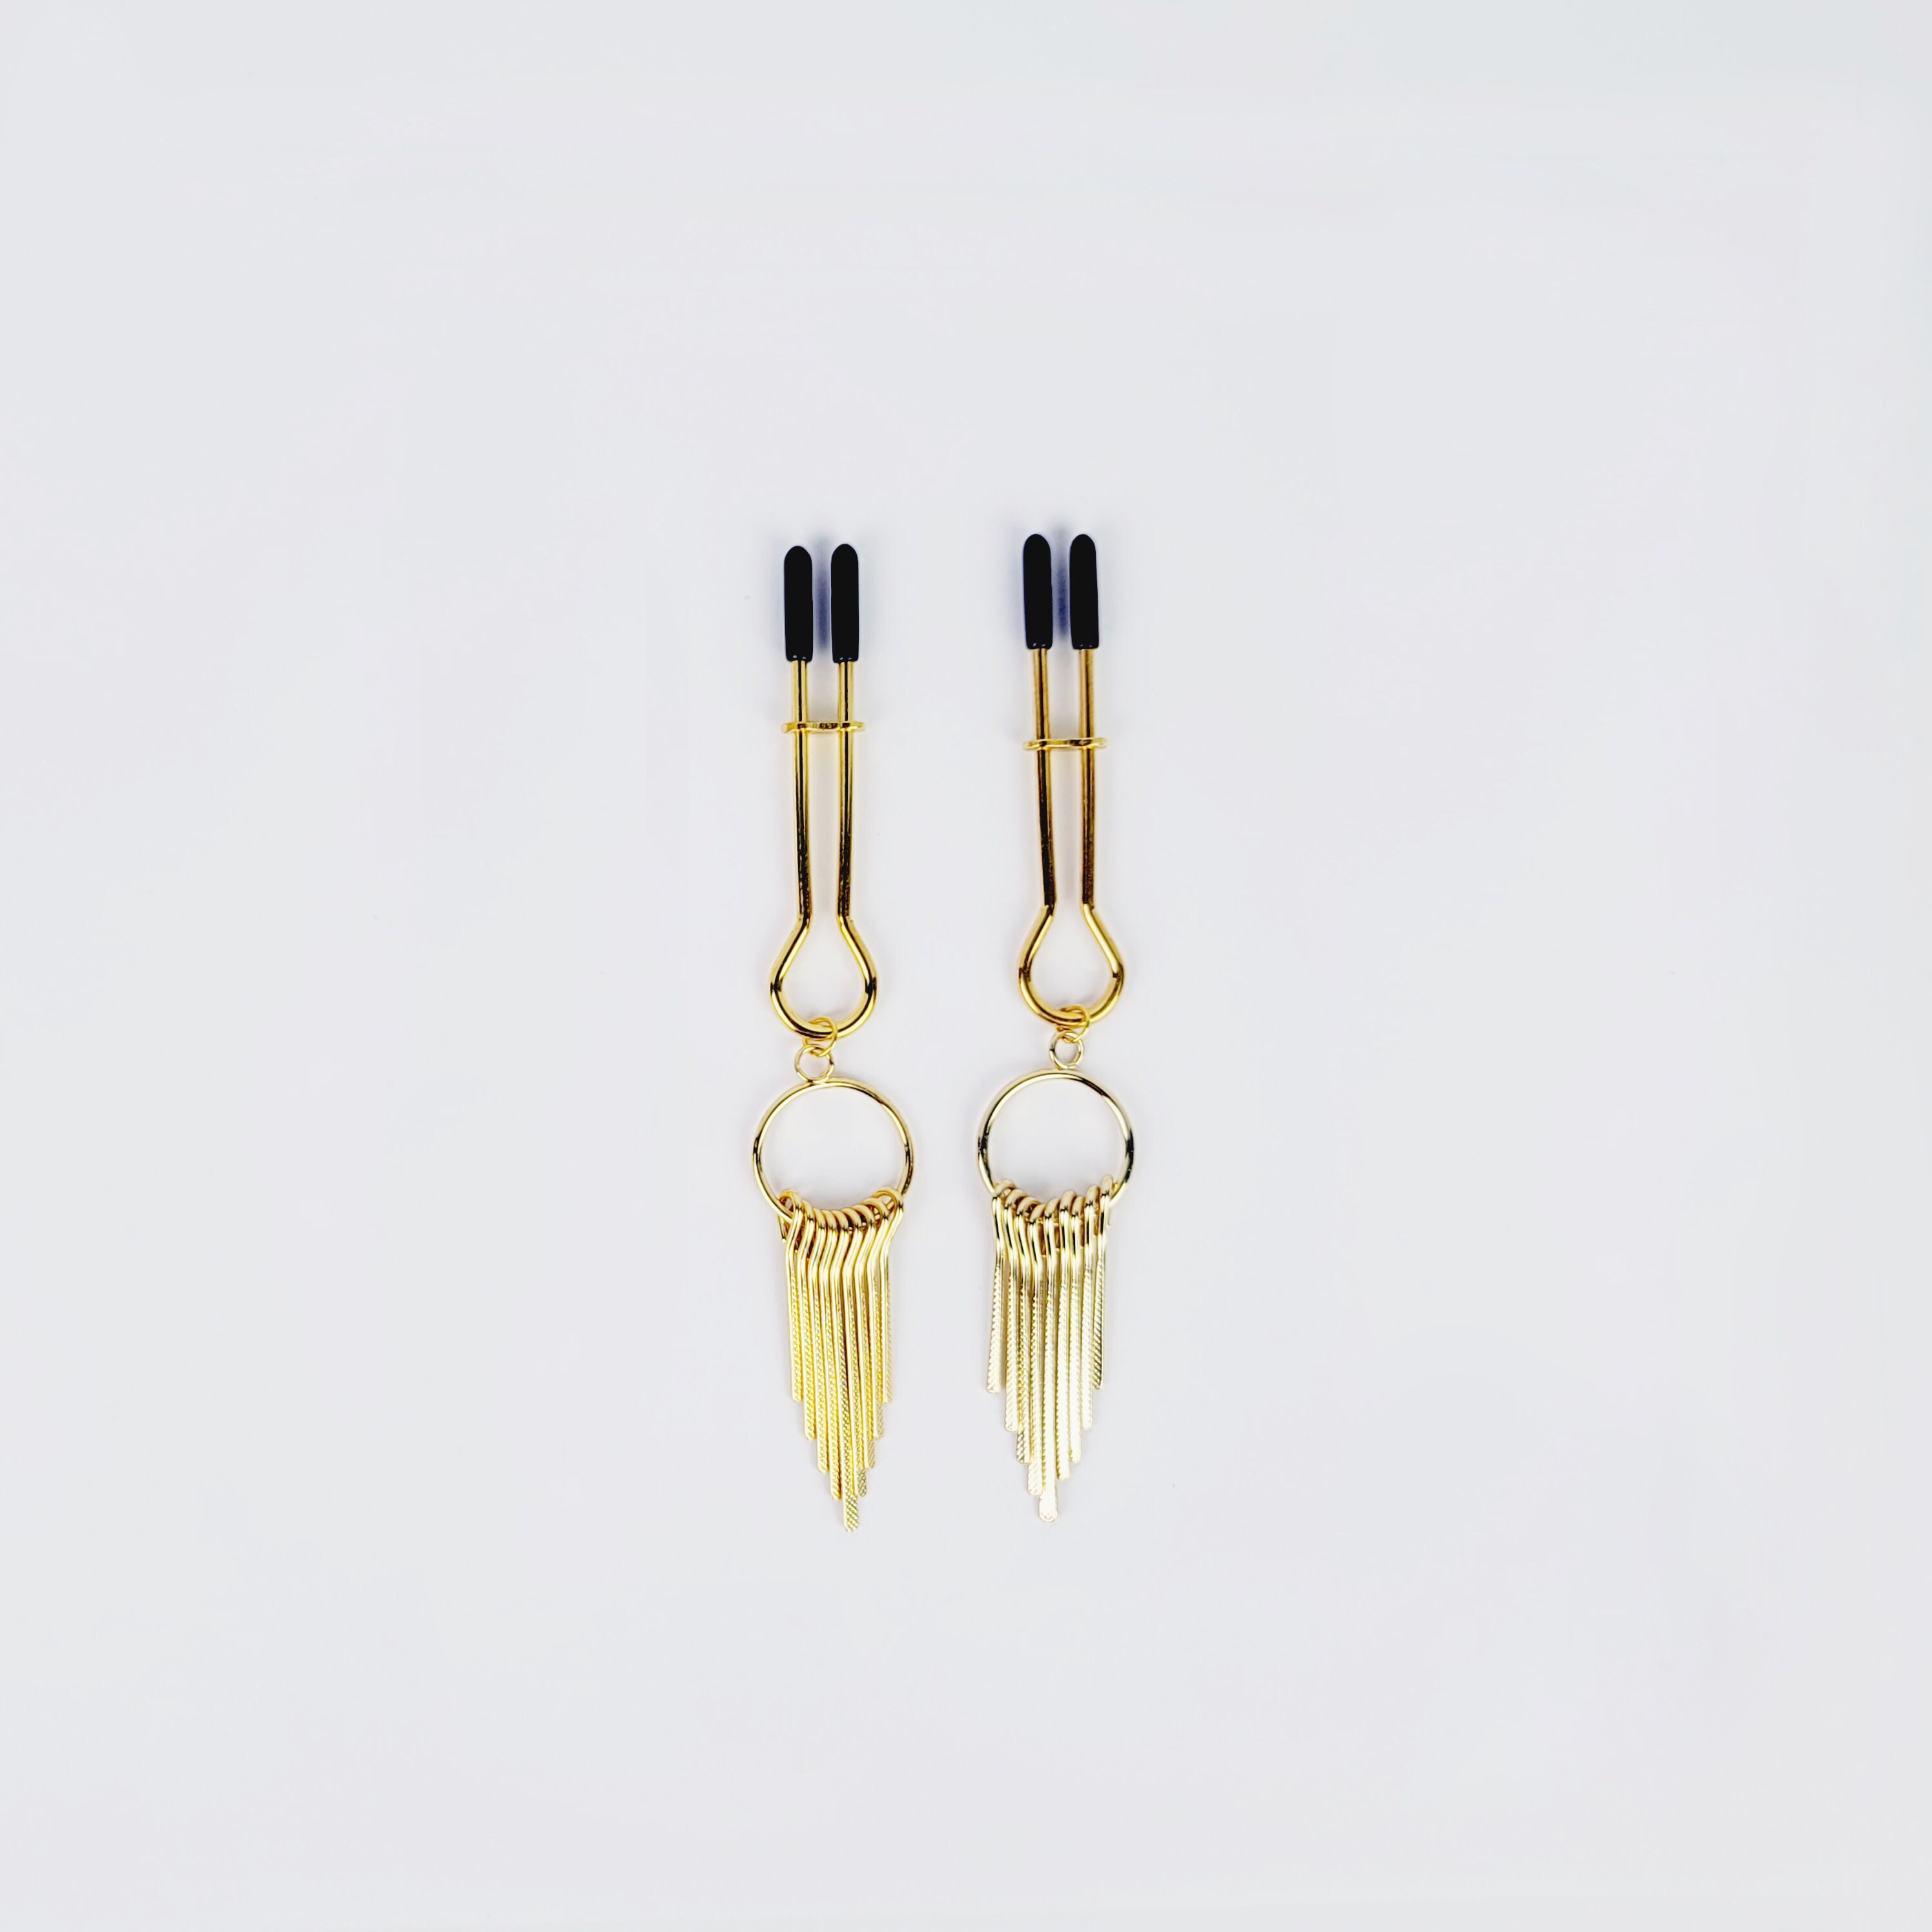 Straight Tweezer Nipple Clamps, Gold, with Dangles. MATURE, BDSM photo